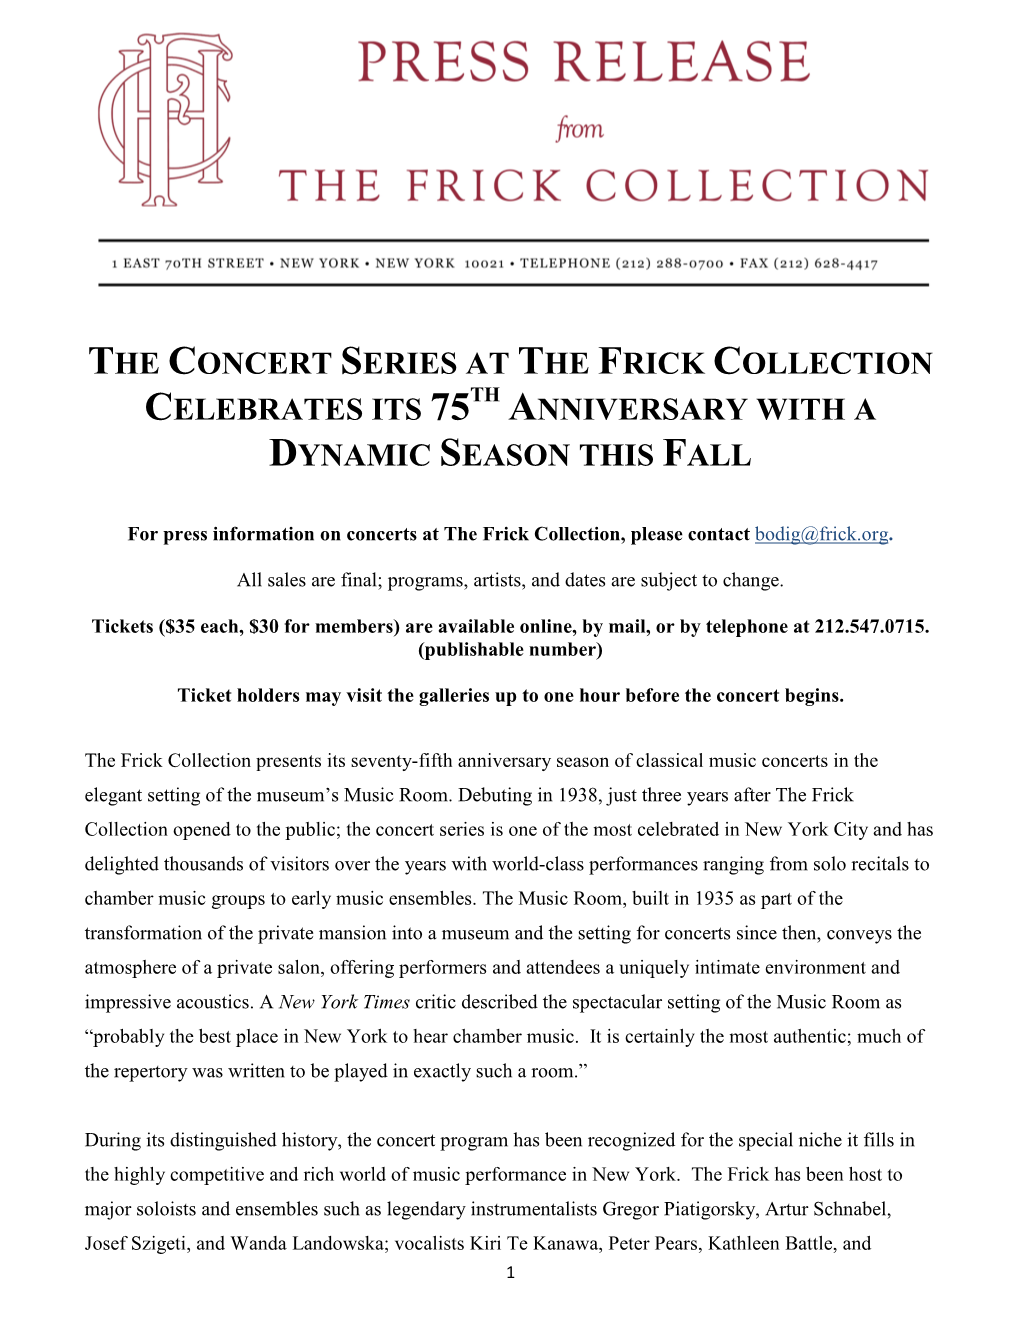 The Concert Series at the Frick Collection Th Celebrates Its 75 Anniversary with a Dynamic Season This Fall